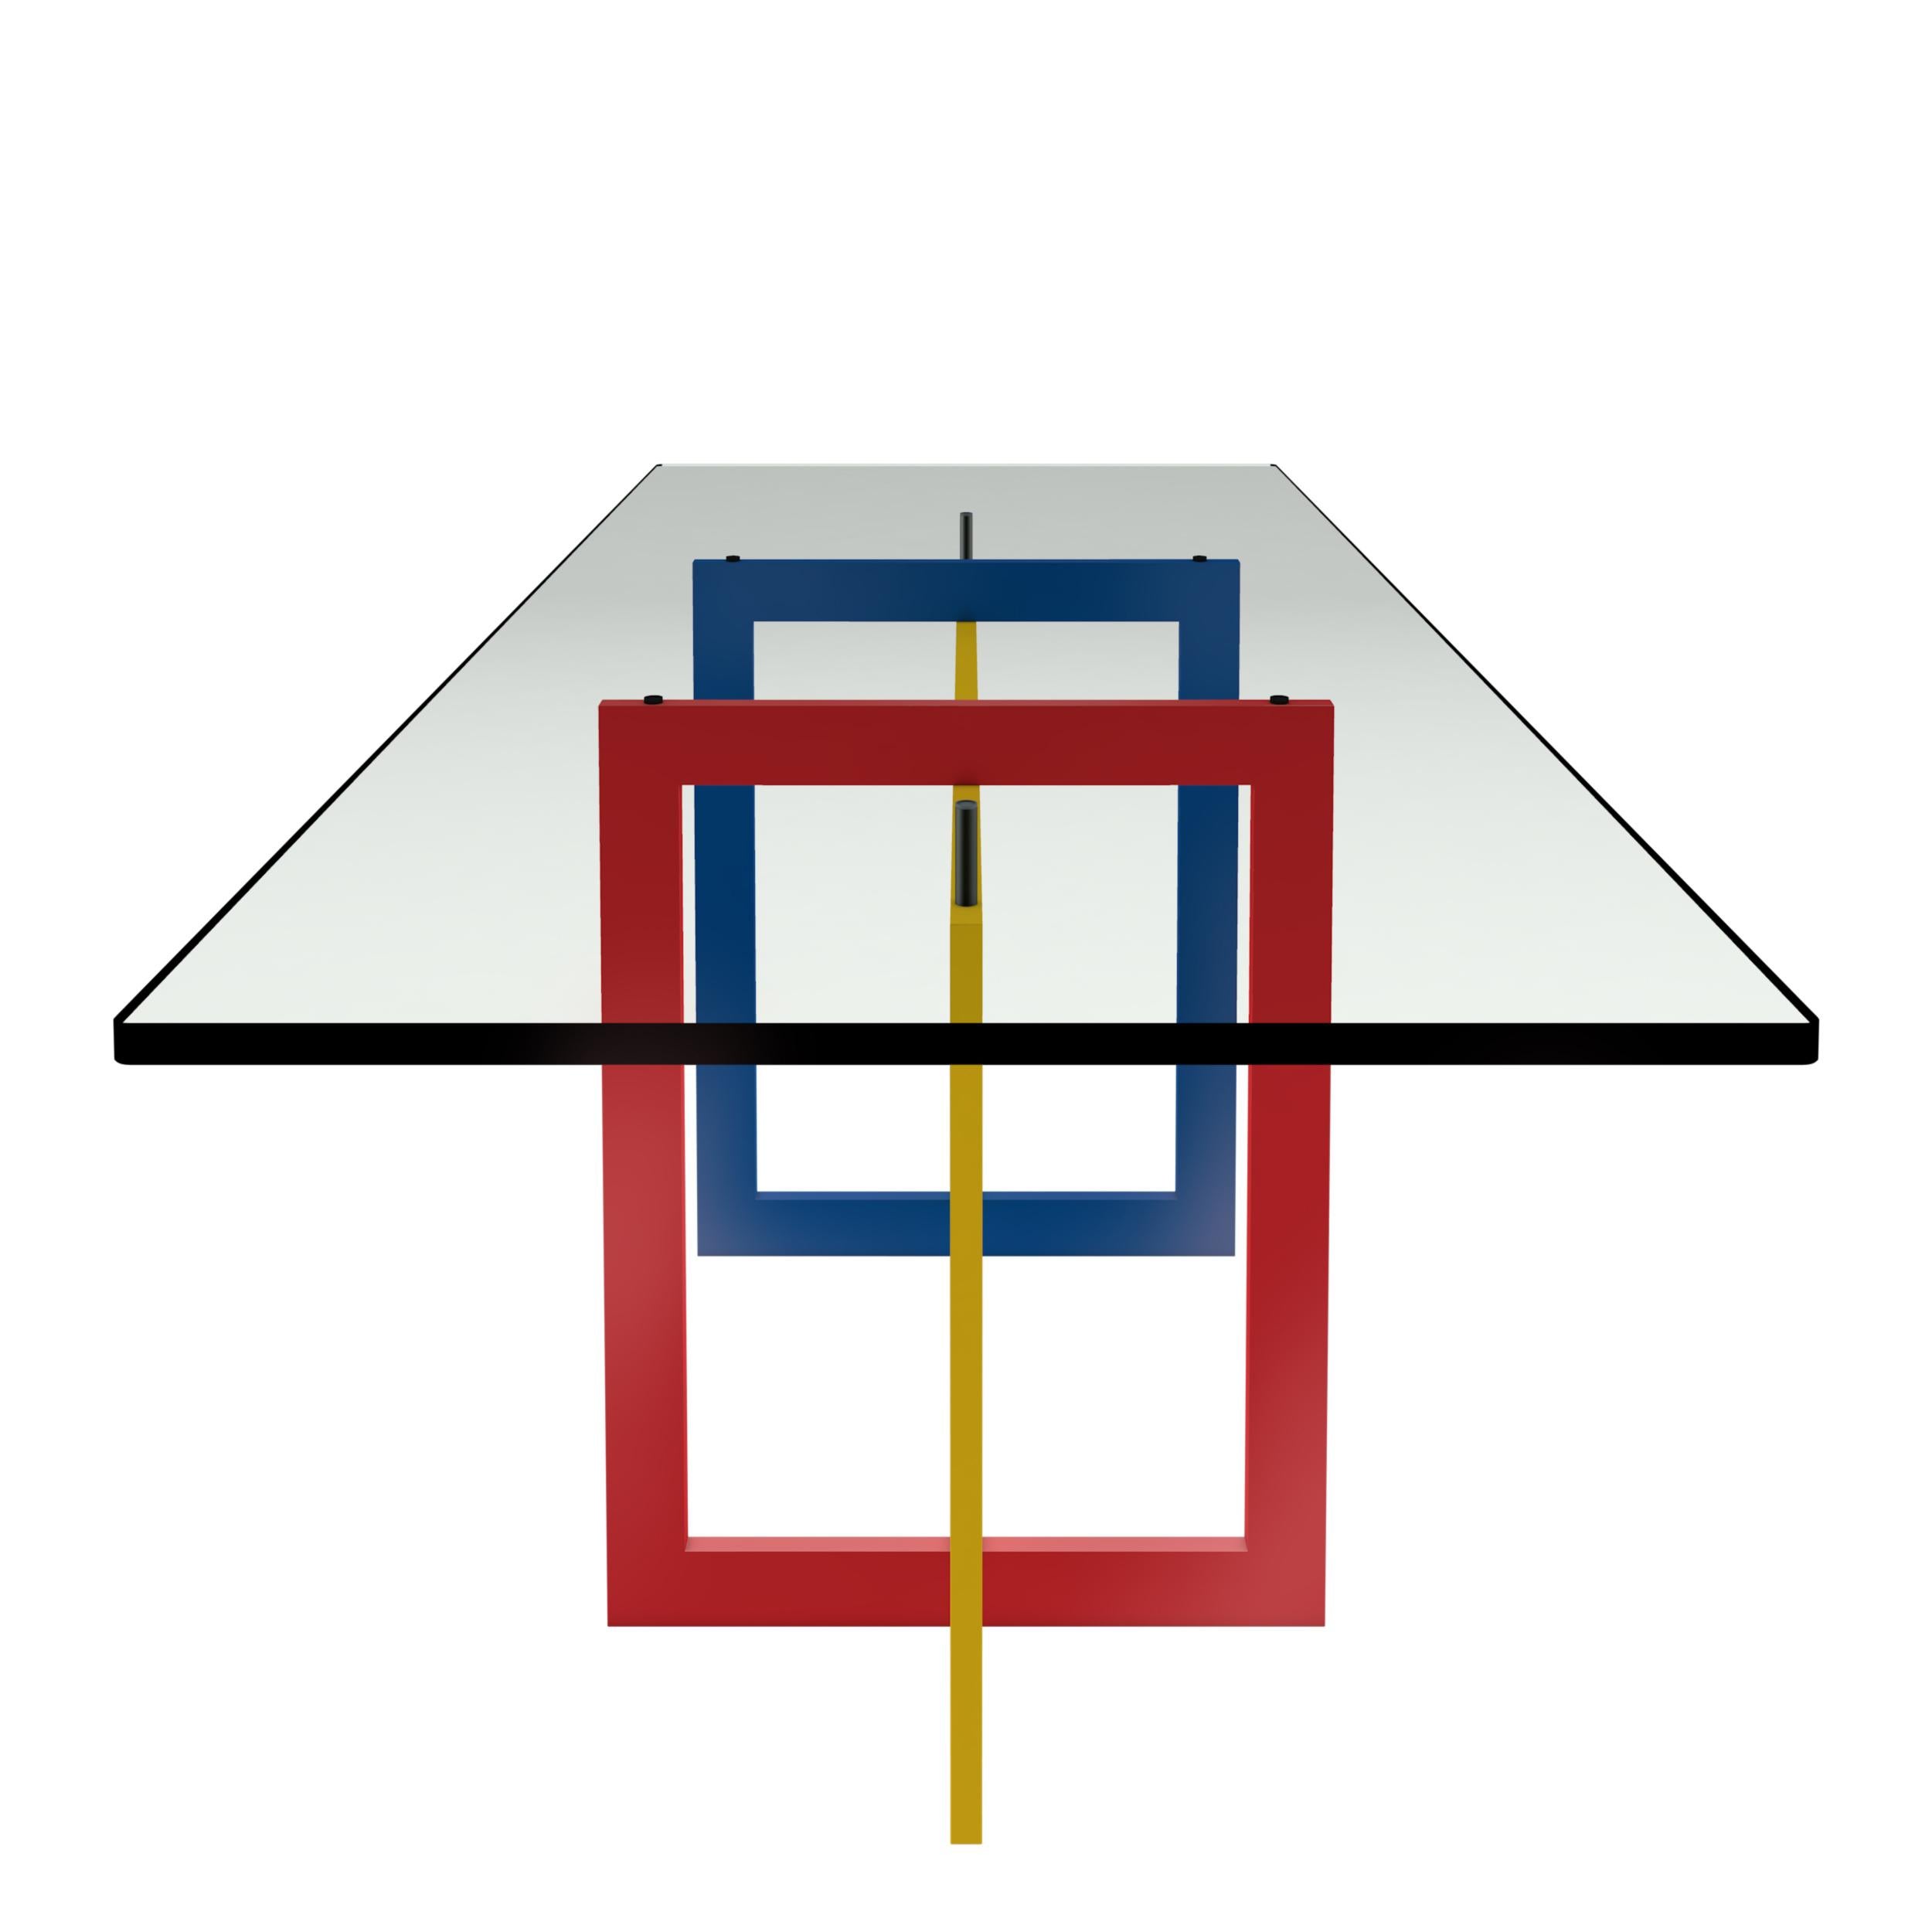 The high Jonathan table features a tubular metal 20 x 60 mm frame, epoxy coated in glossy red, blue and yellow colors in the 